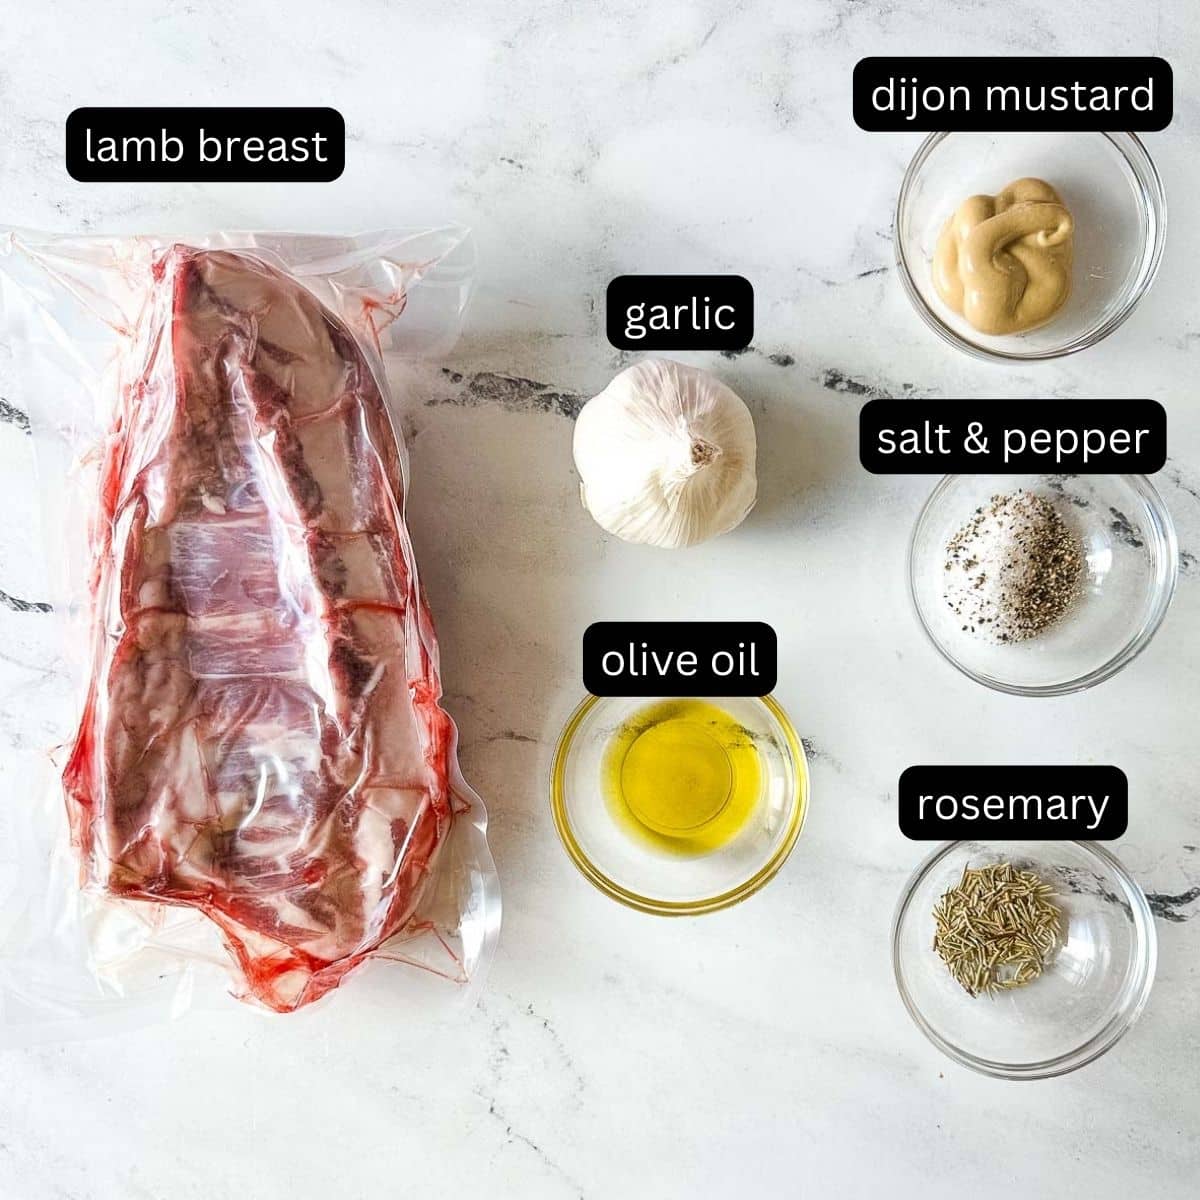 labeled ingredients for lamb breast recipe.